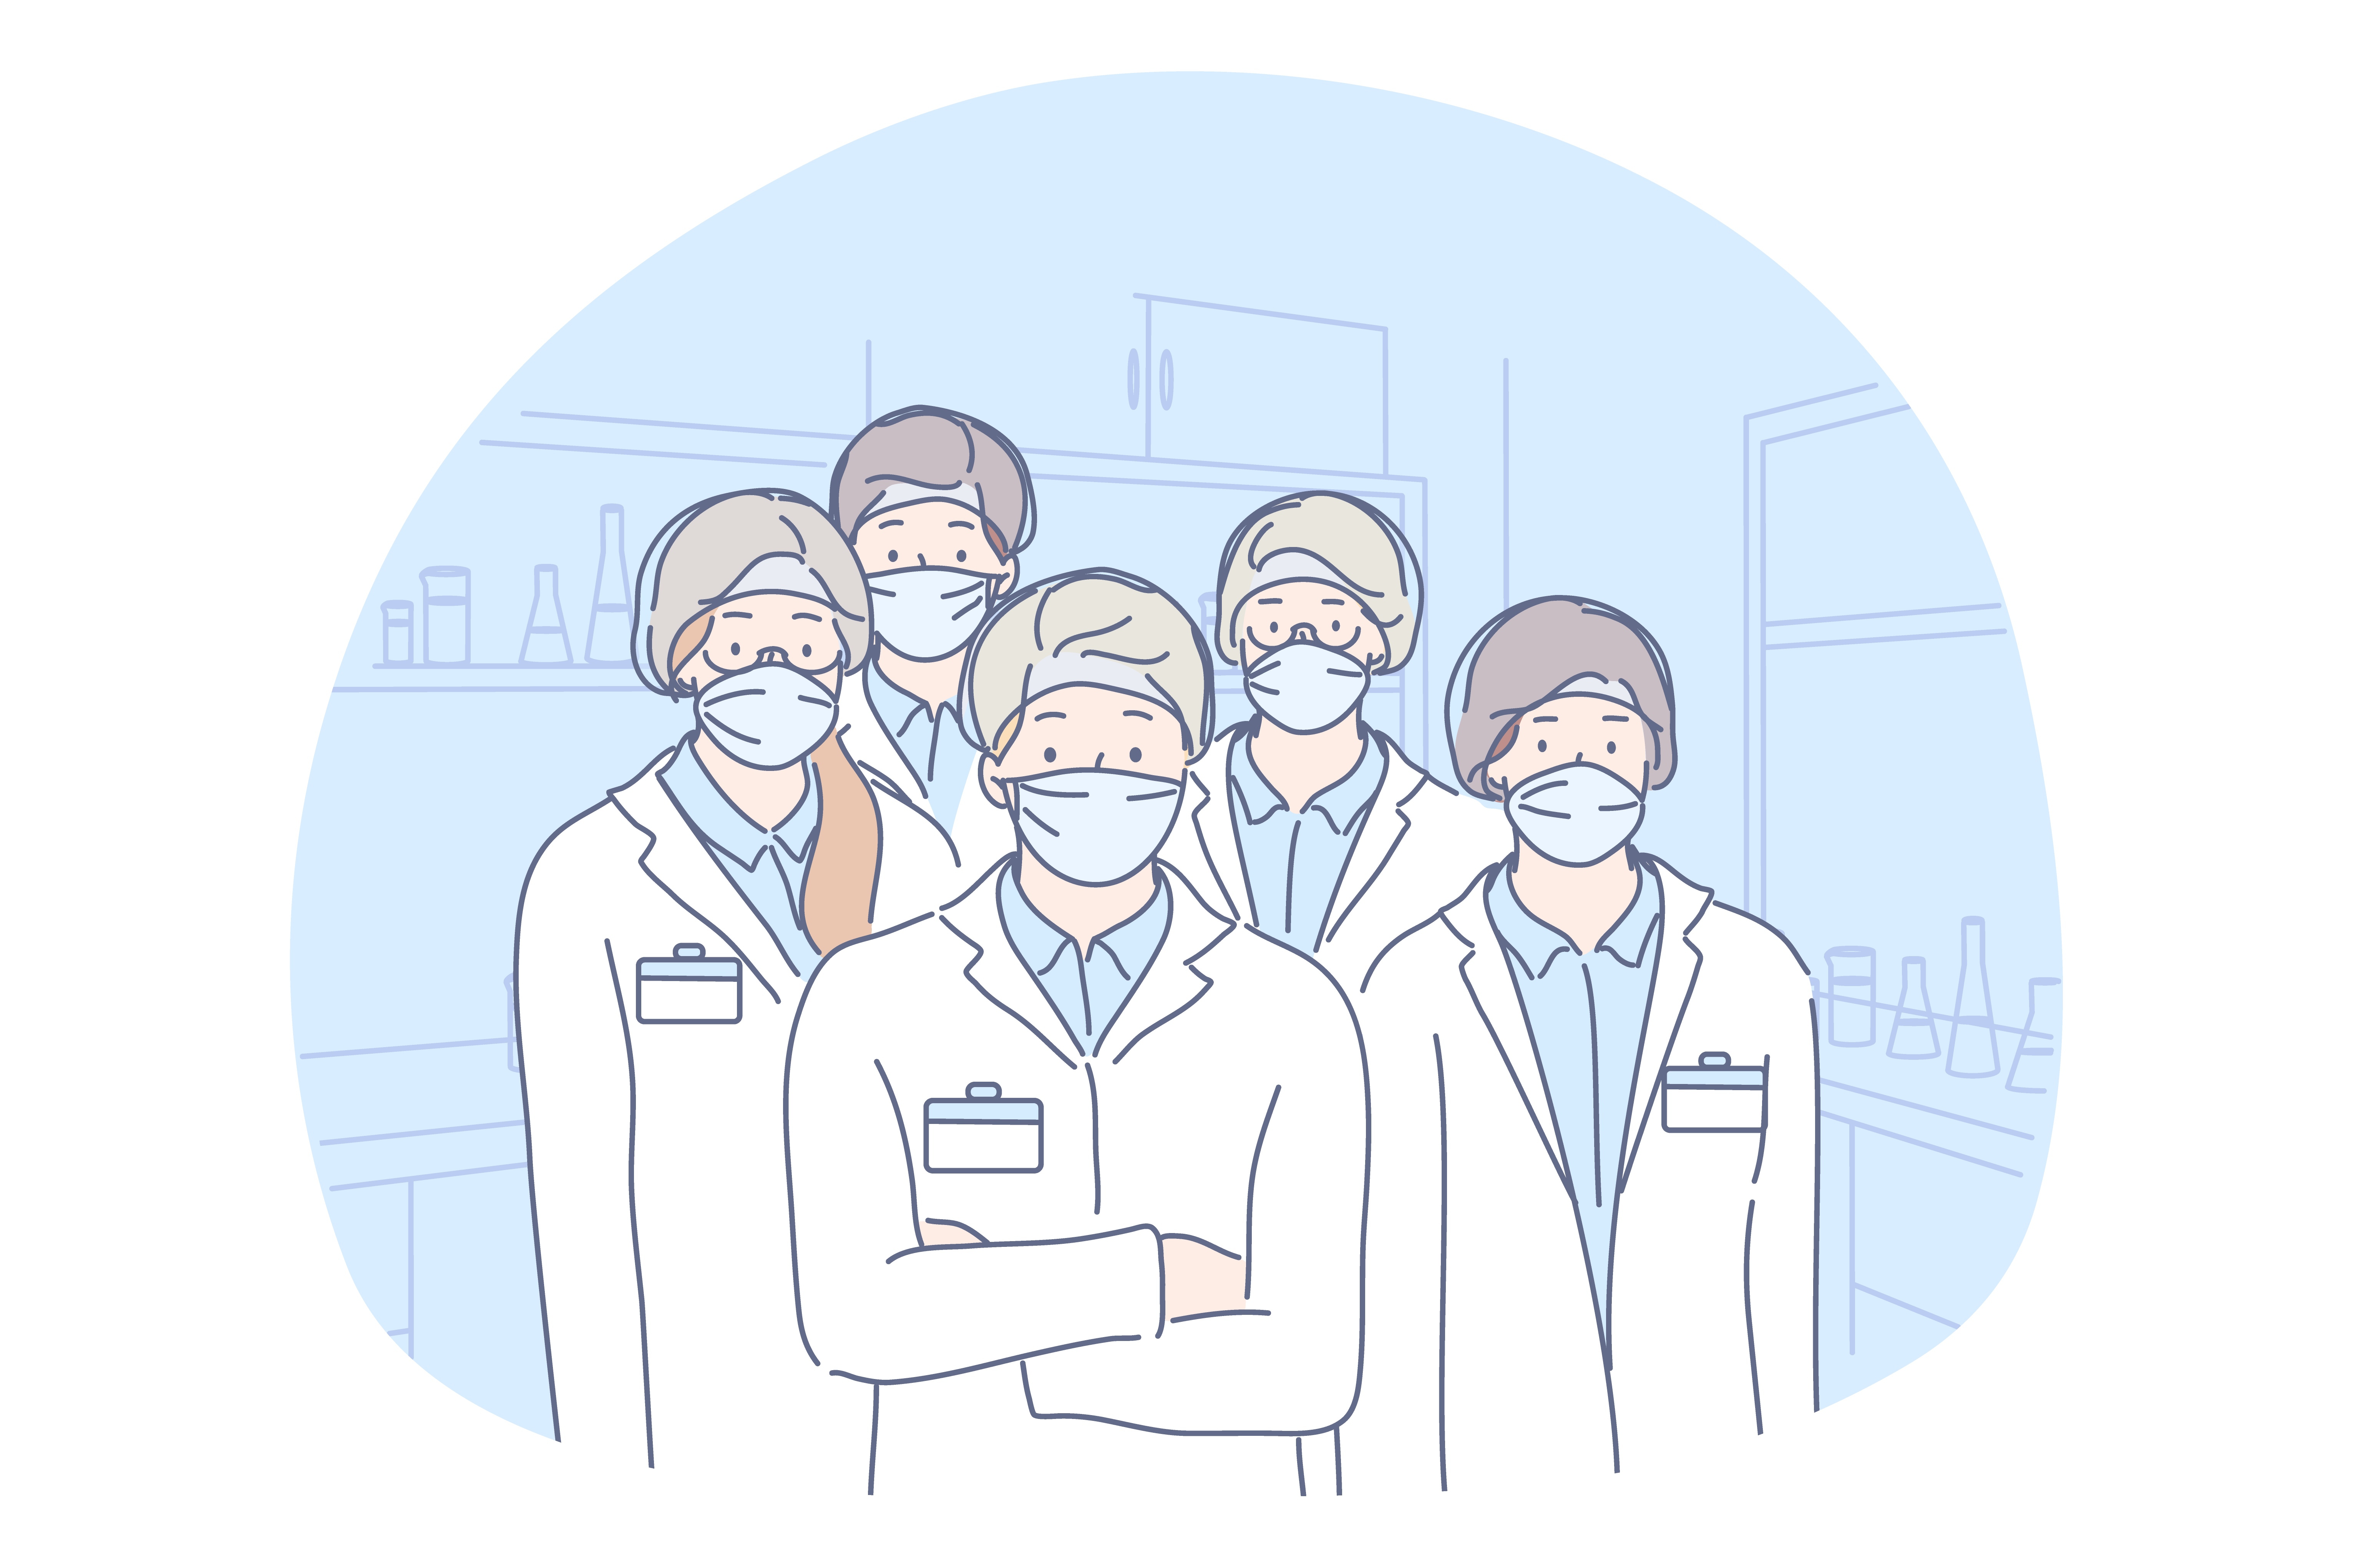 Healthcare, medicine, infection, coronavirus, protection concept. Group or team of men and women doctors lab workers scientists colleagues with medical face masks illustration. Covid19 desease danger.. Healthcare, medicine, infection, coronavirus, protection concept